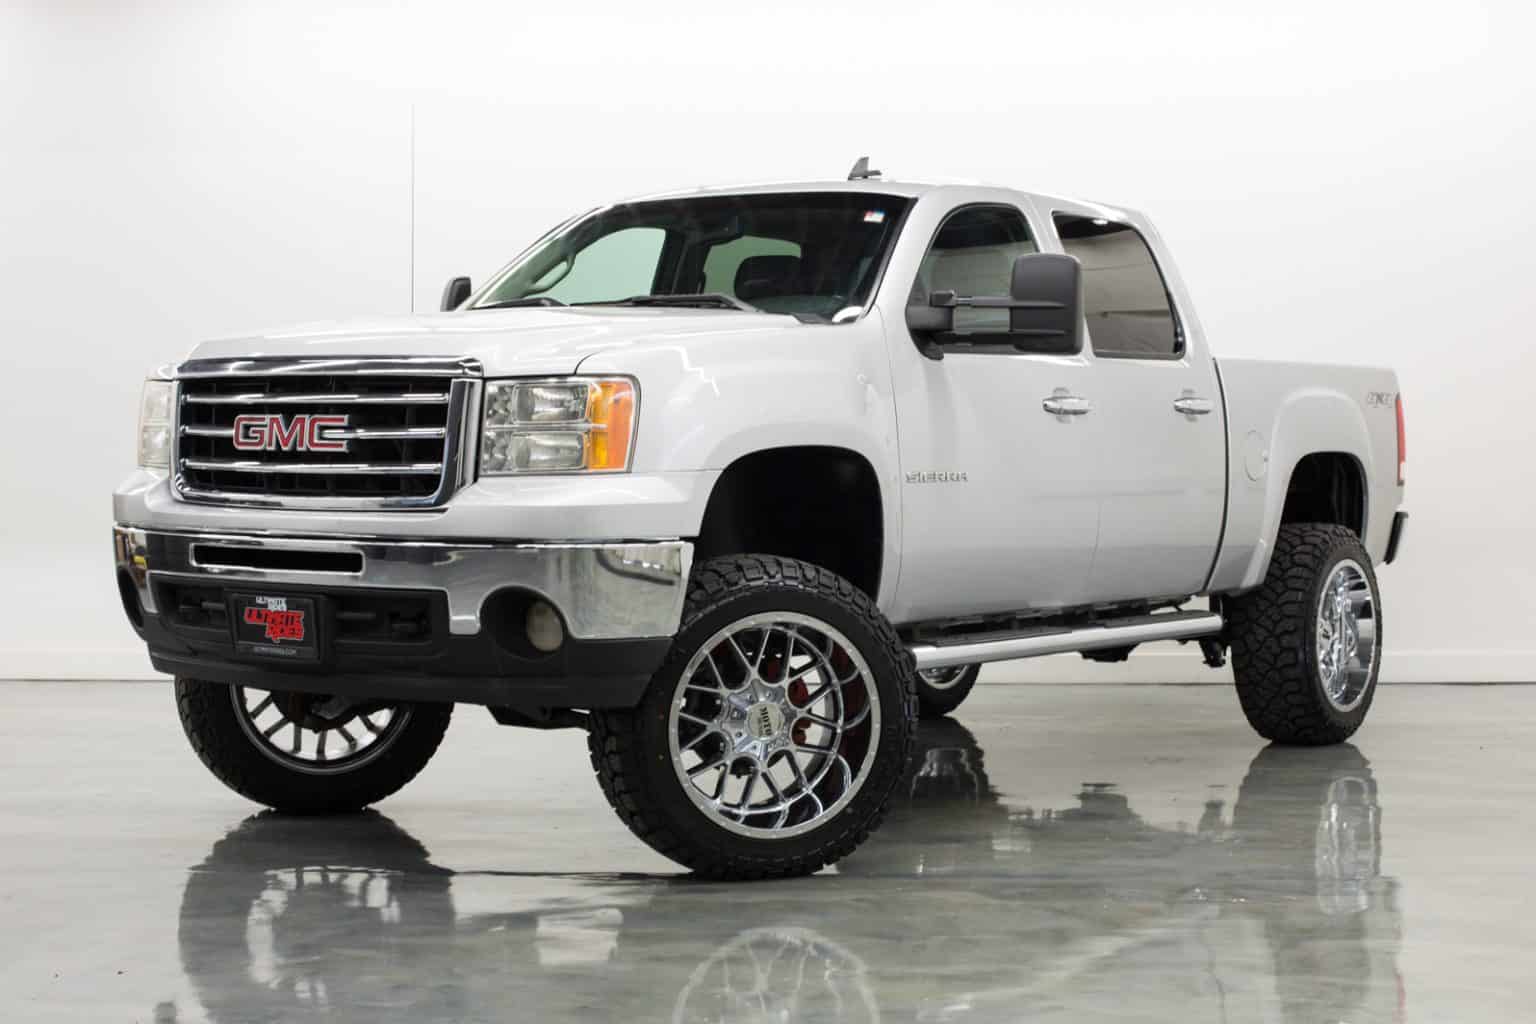 GMC Lifted Trucks for Sale